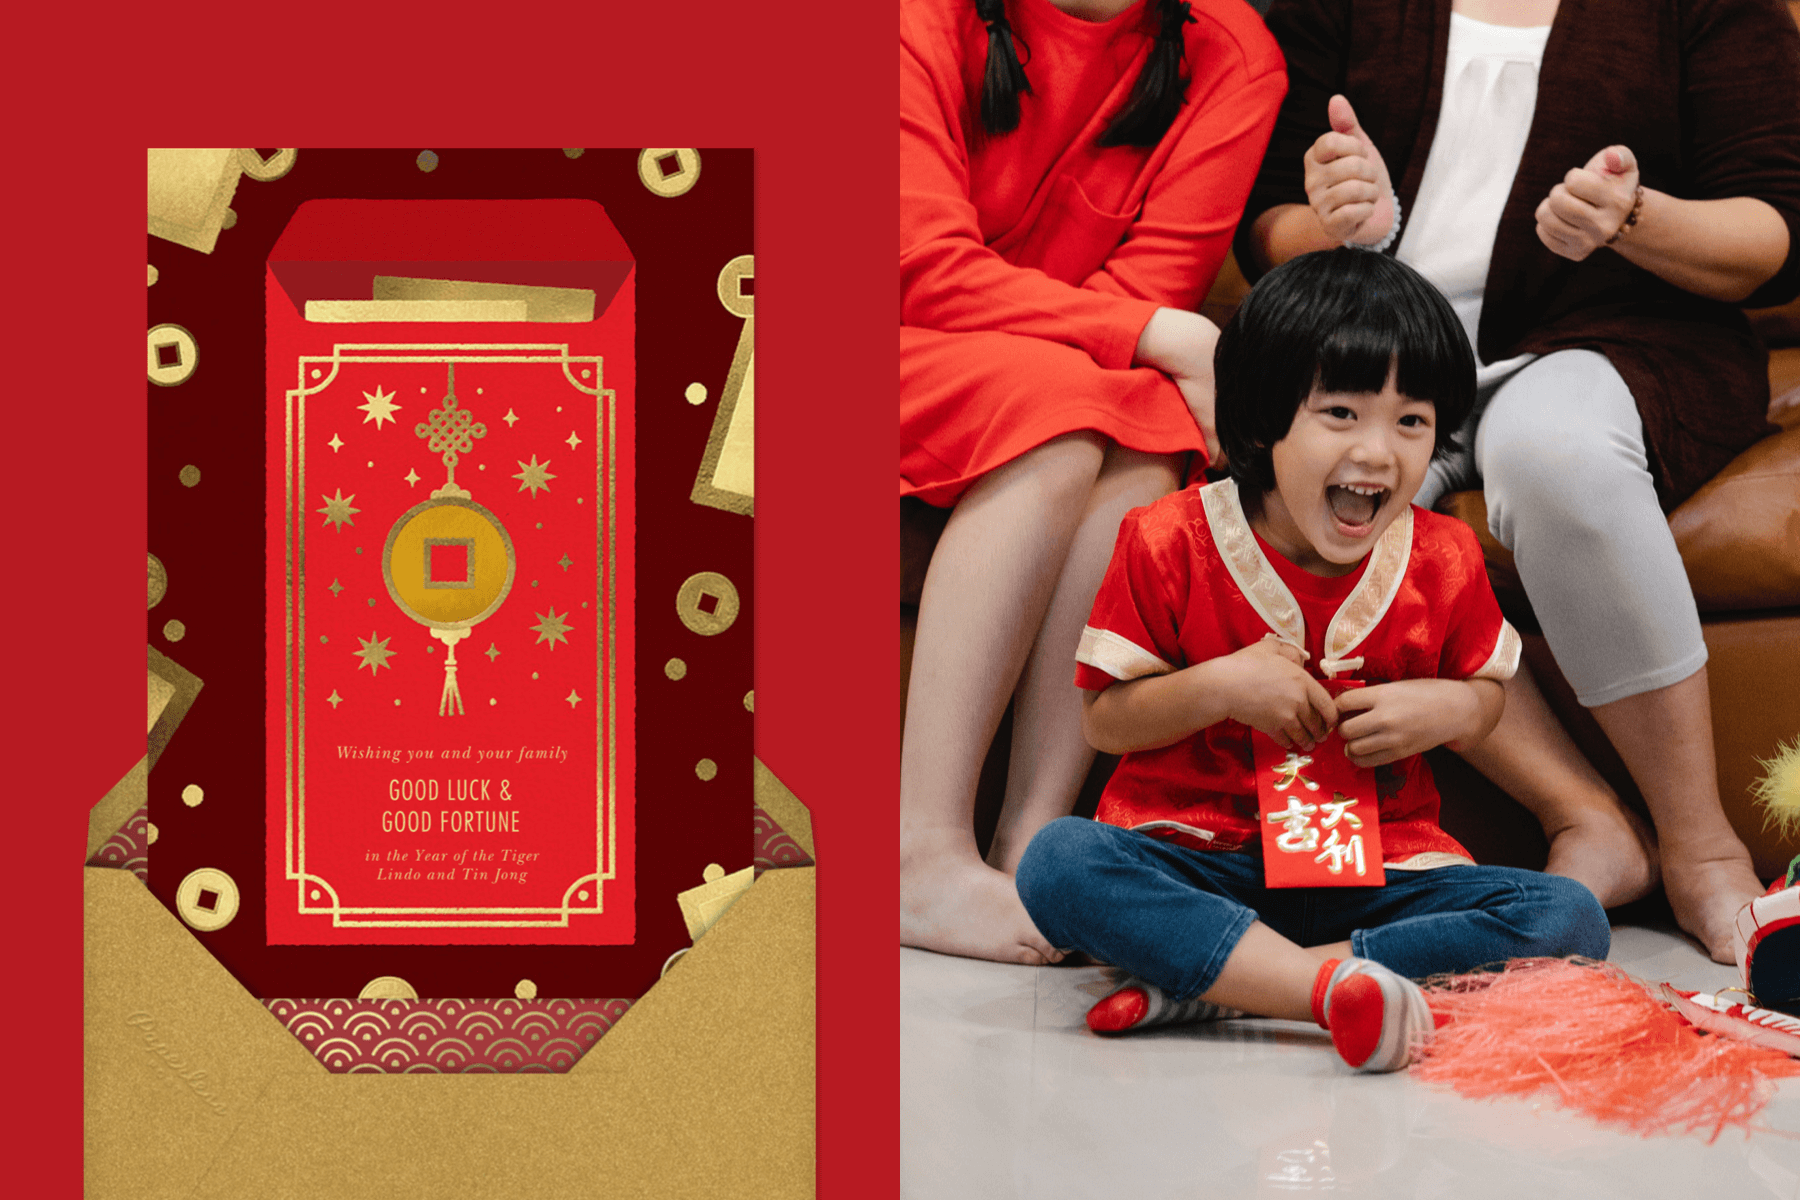 Left: A Lunar New Year invitation featuring a red envelope. | Right: A small child excited to receive a red envelope at a Lunar New Year party.